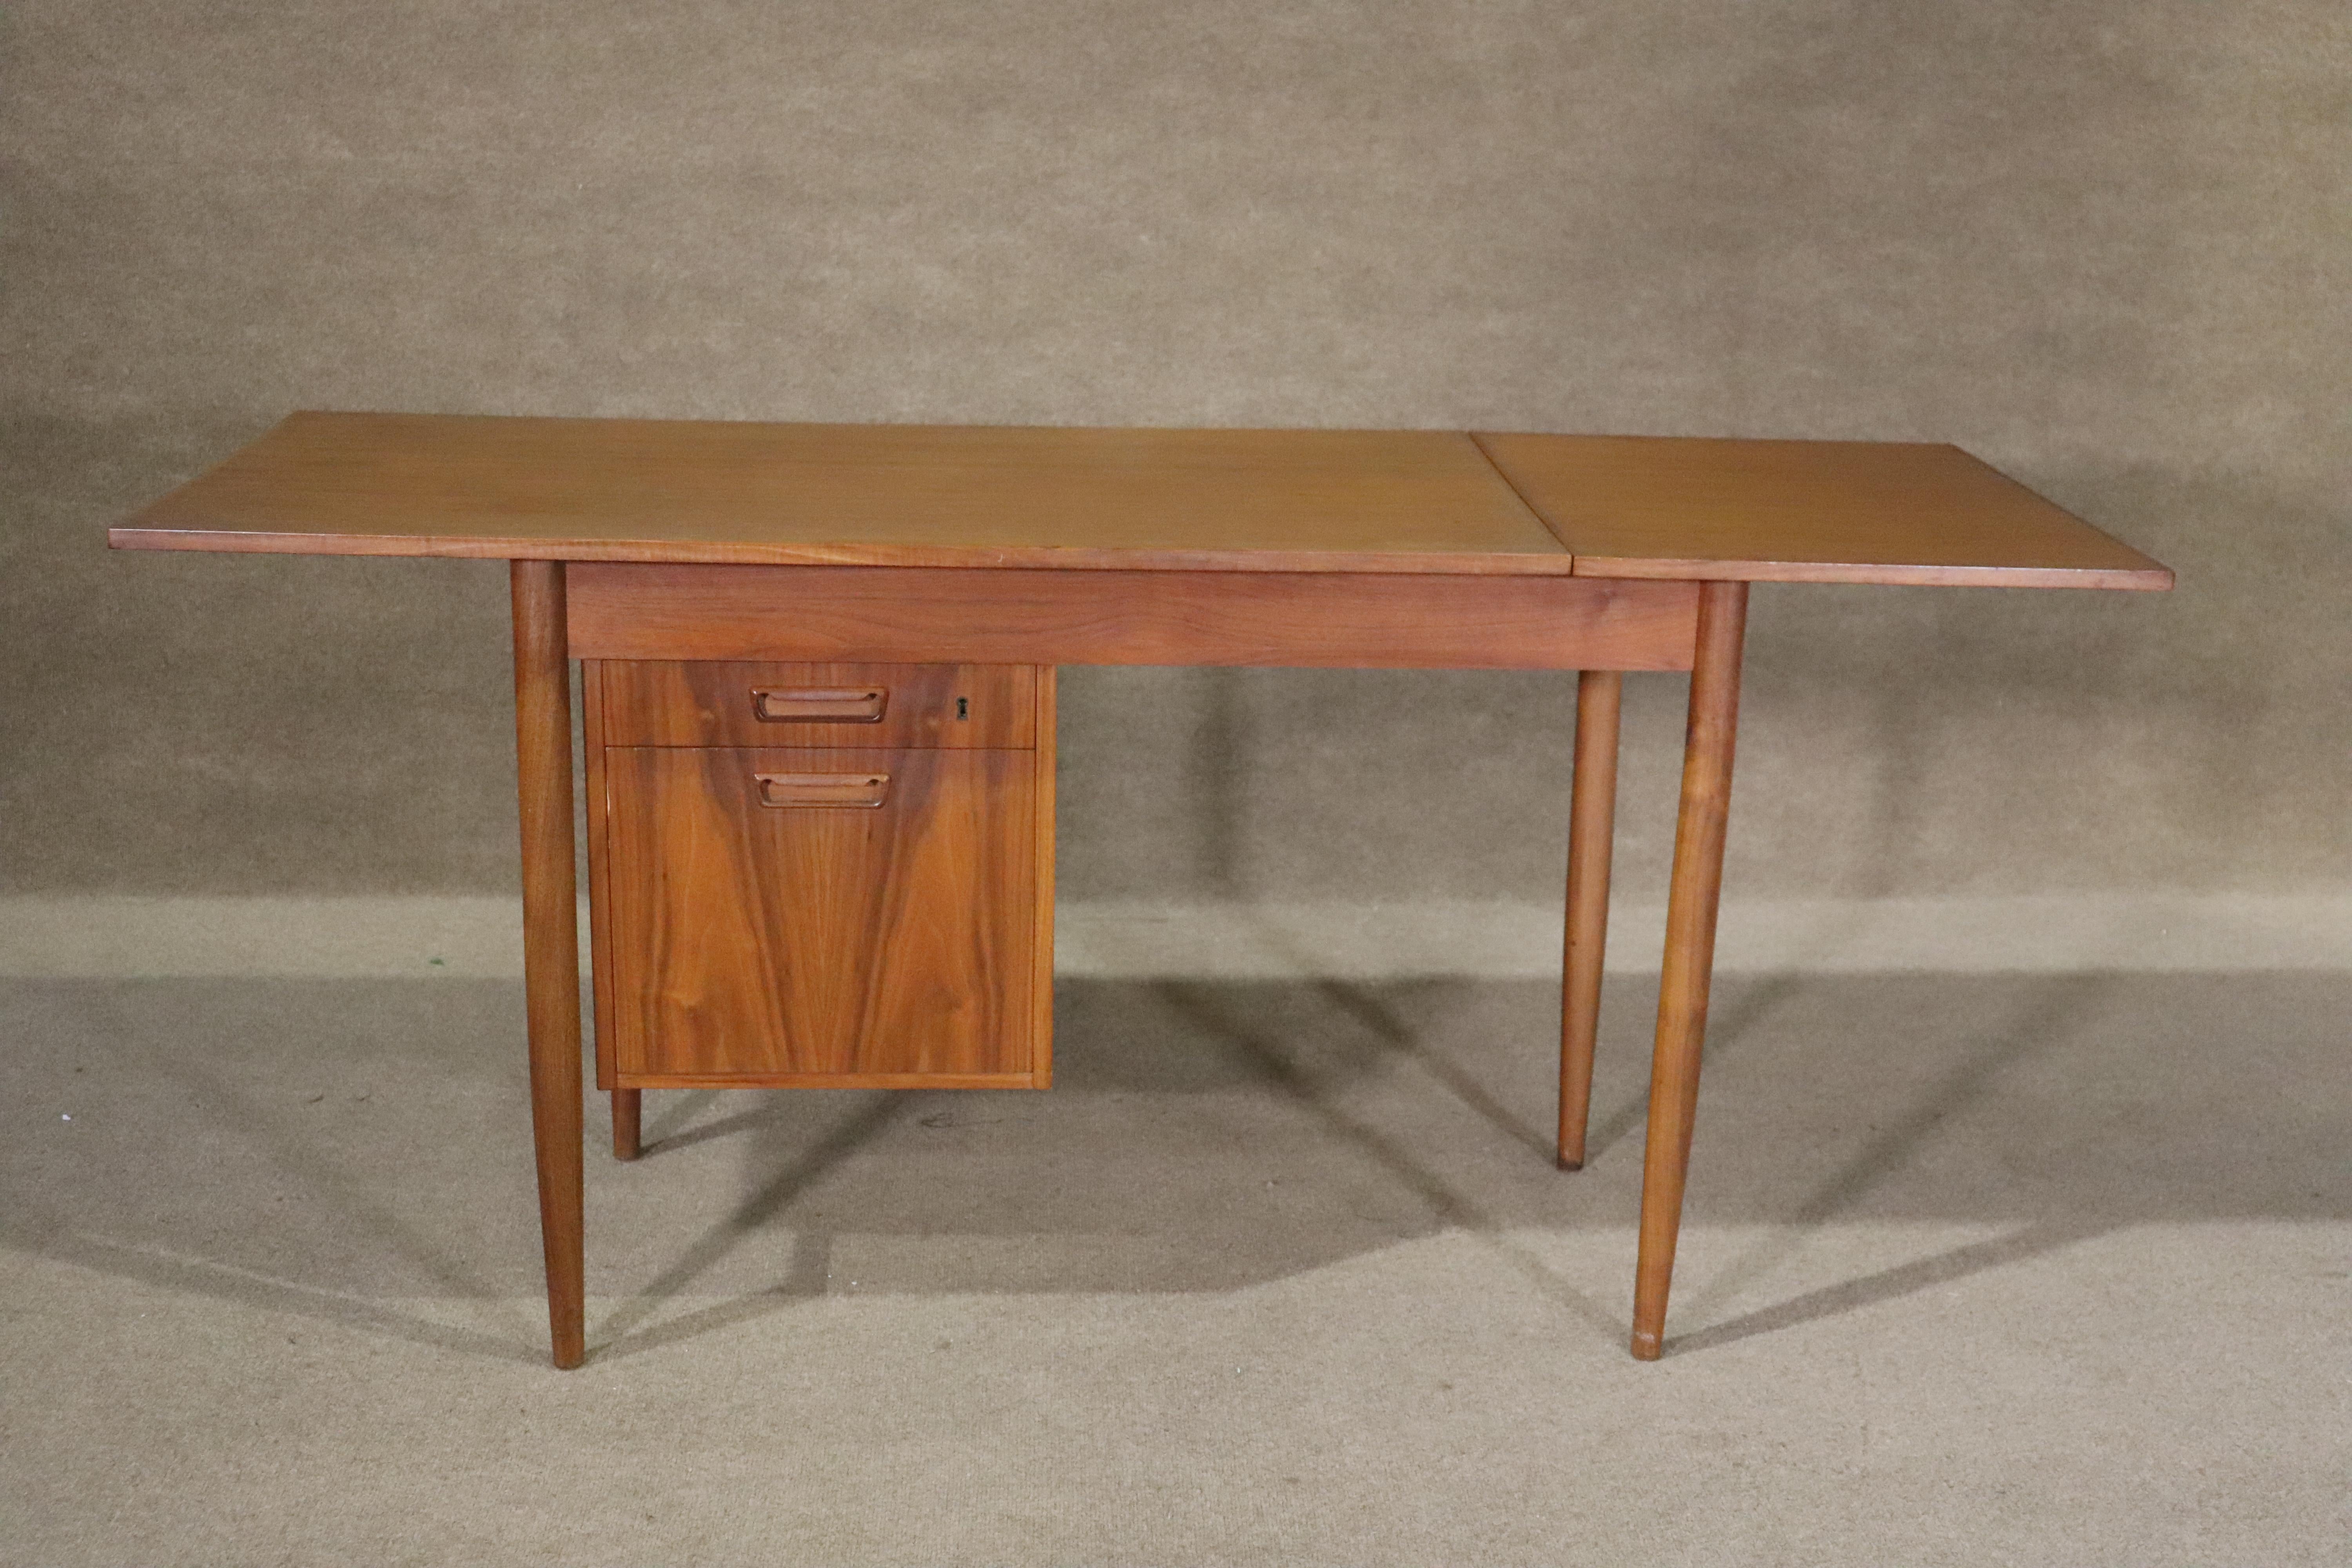 Mid-century modern teak desk by Maurice Villency. Features movable drawers and a 19